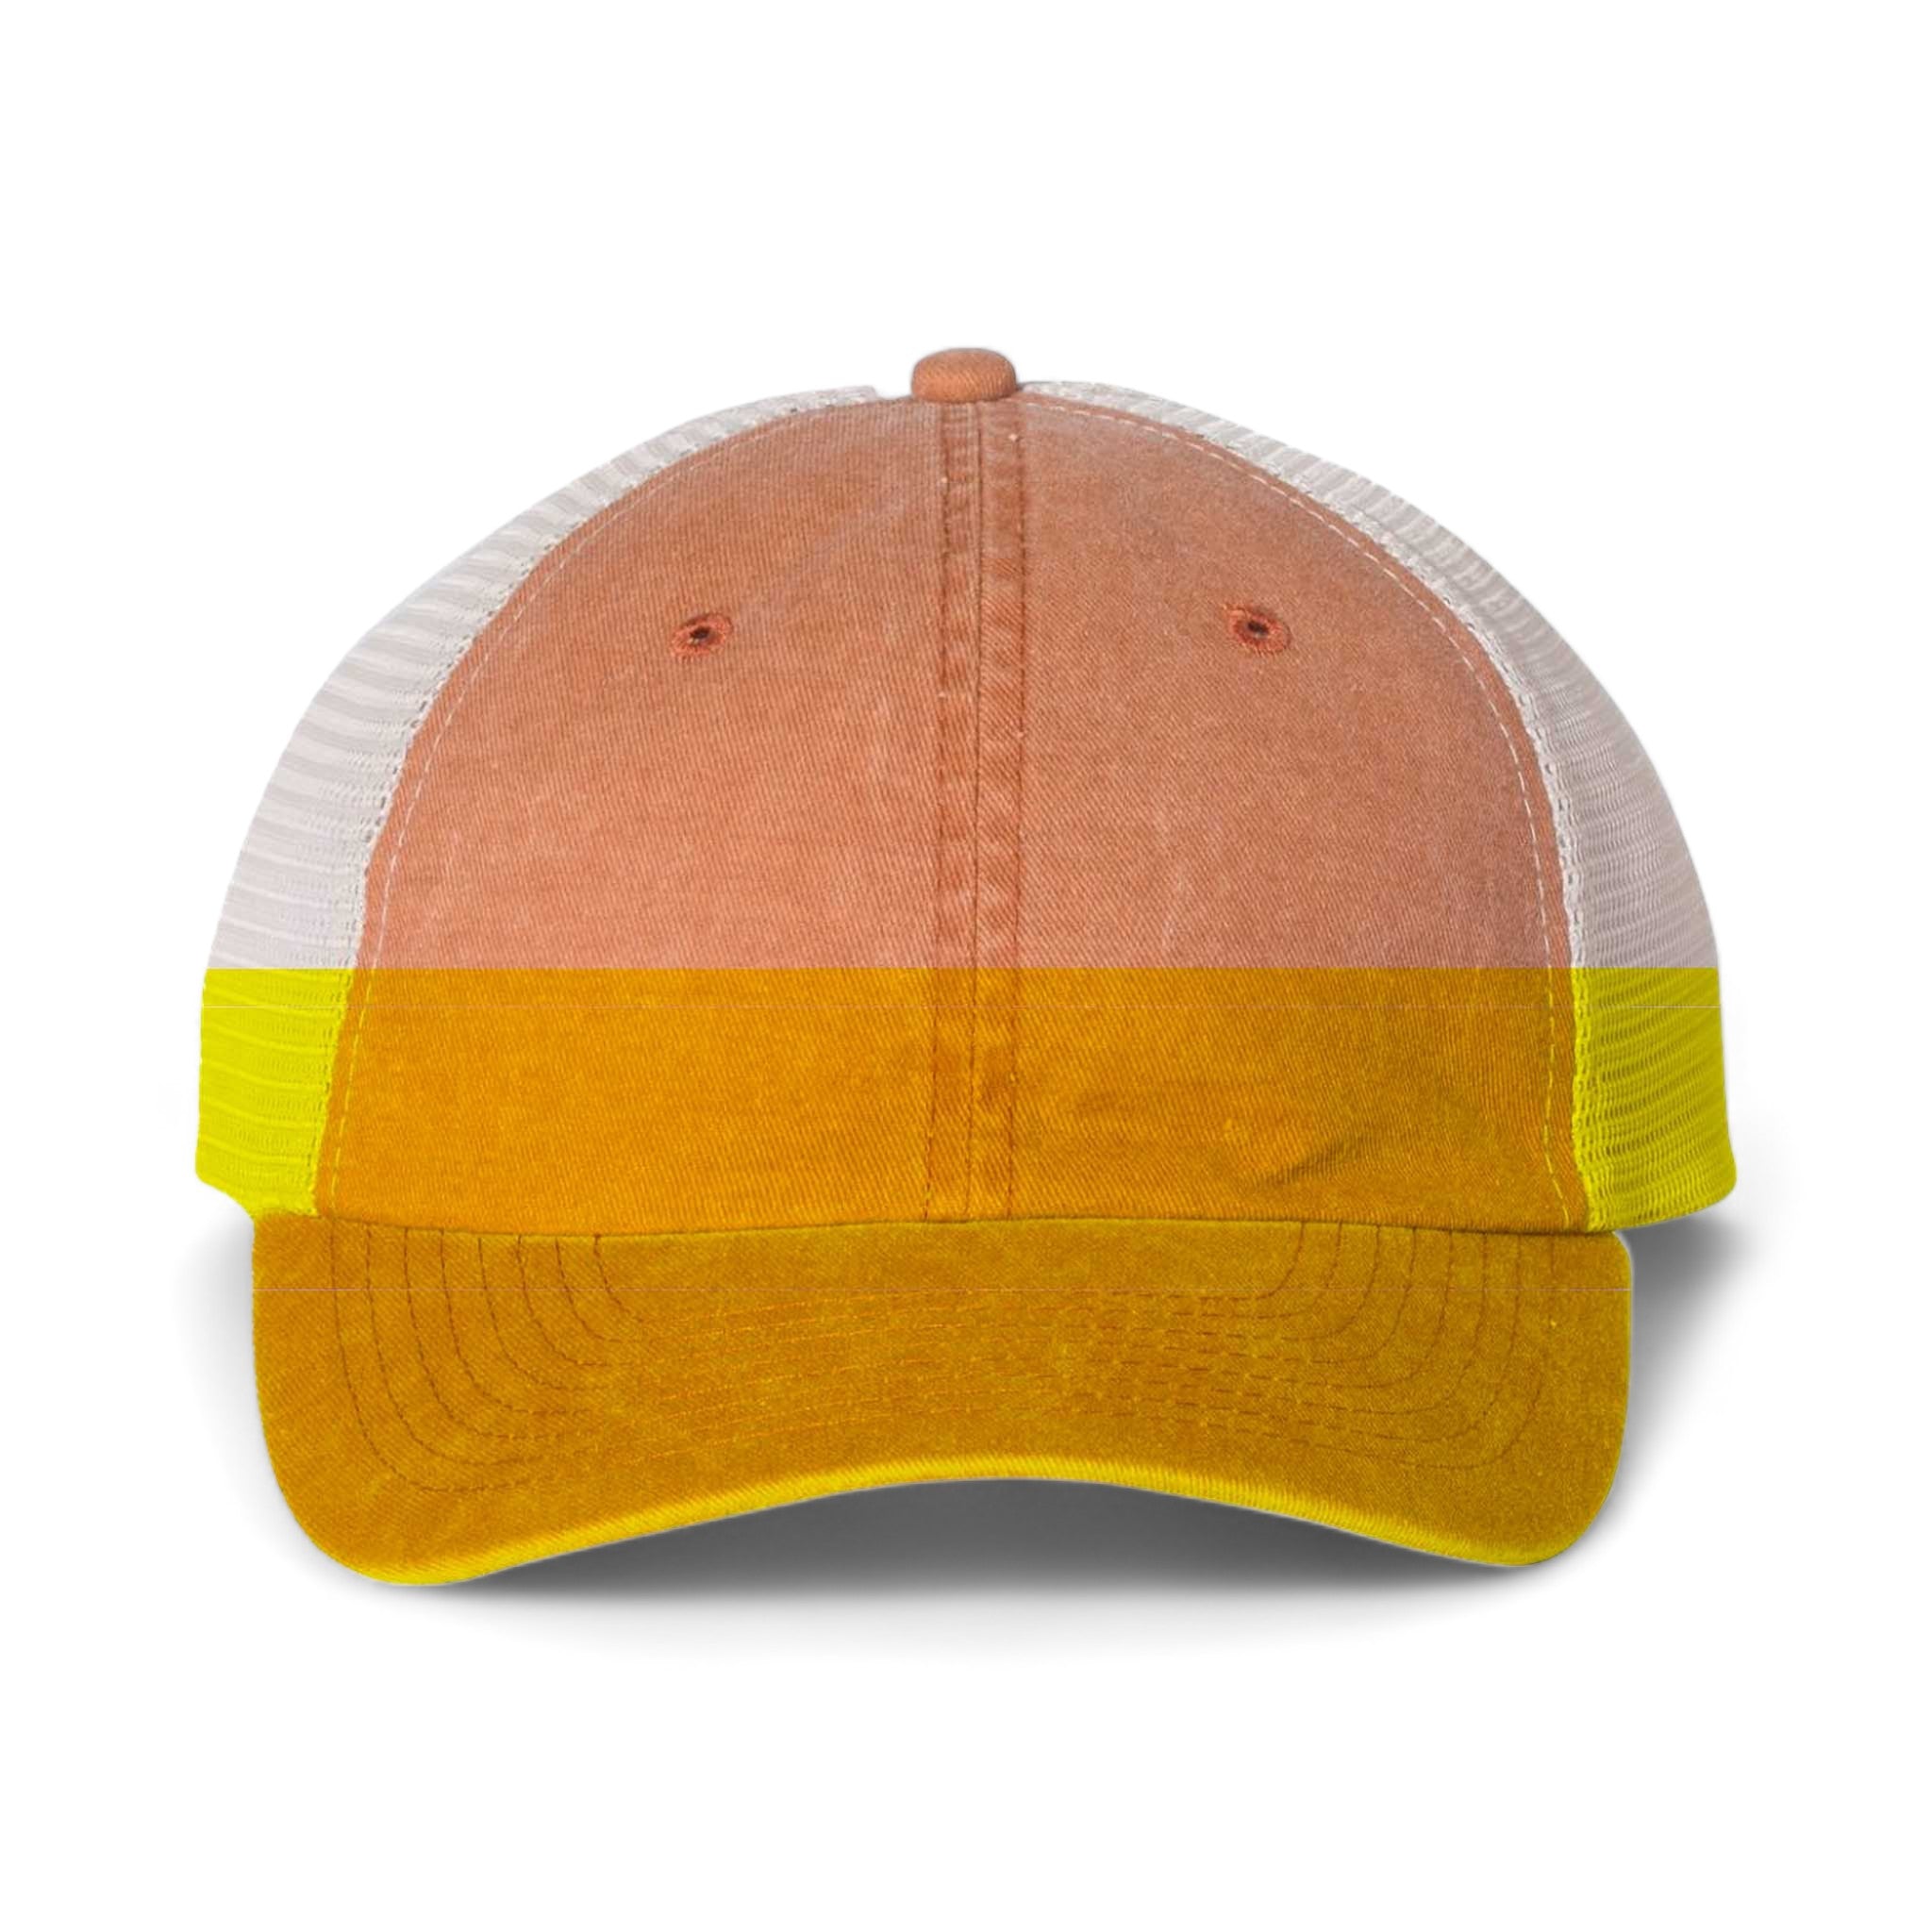 Front view of Sportsman SP510 custom hat in texas orange and stone